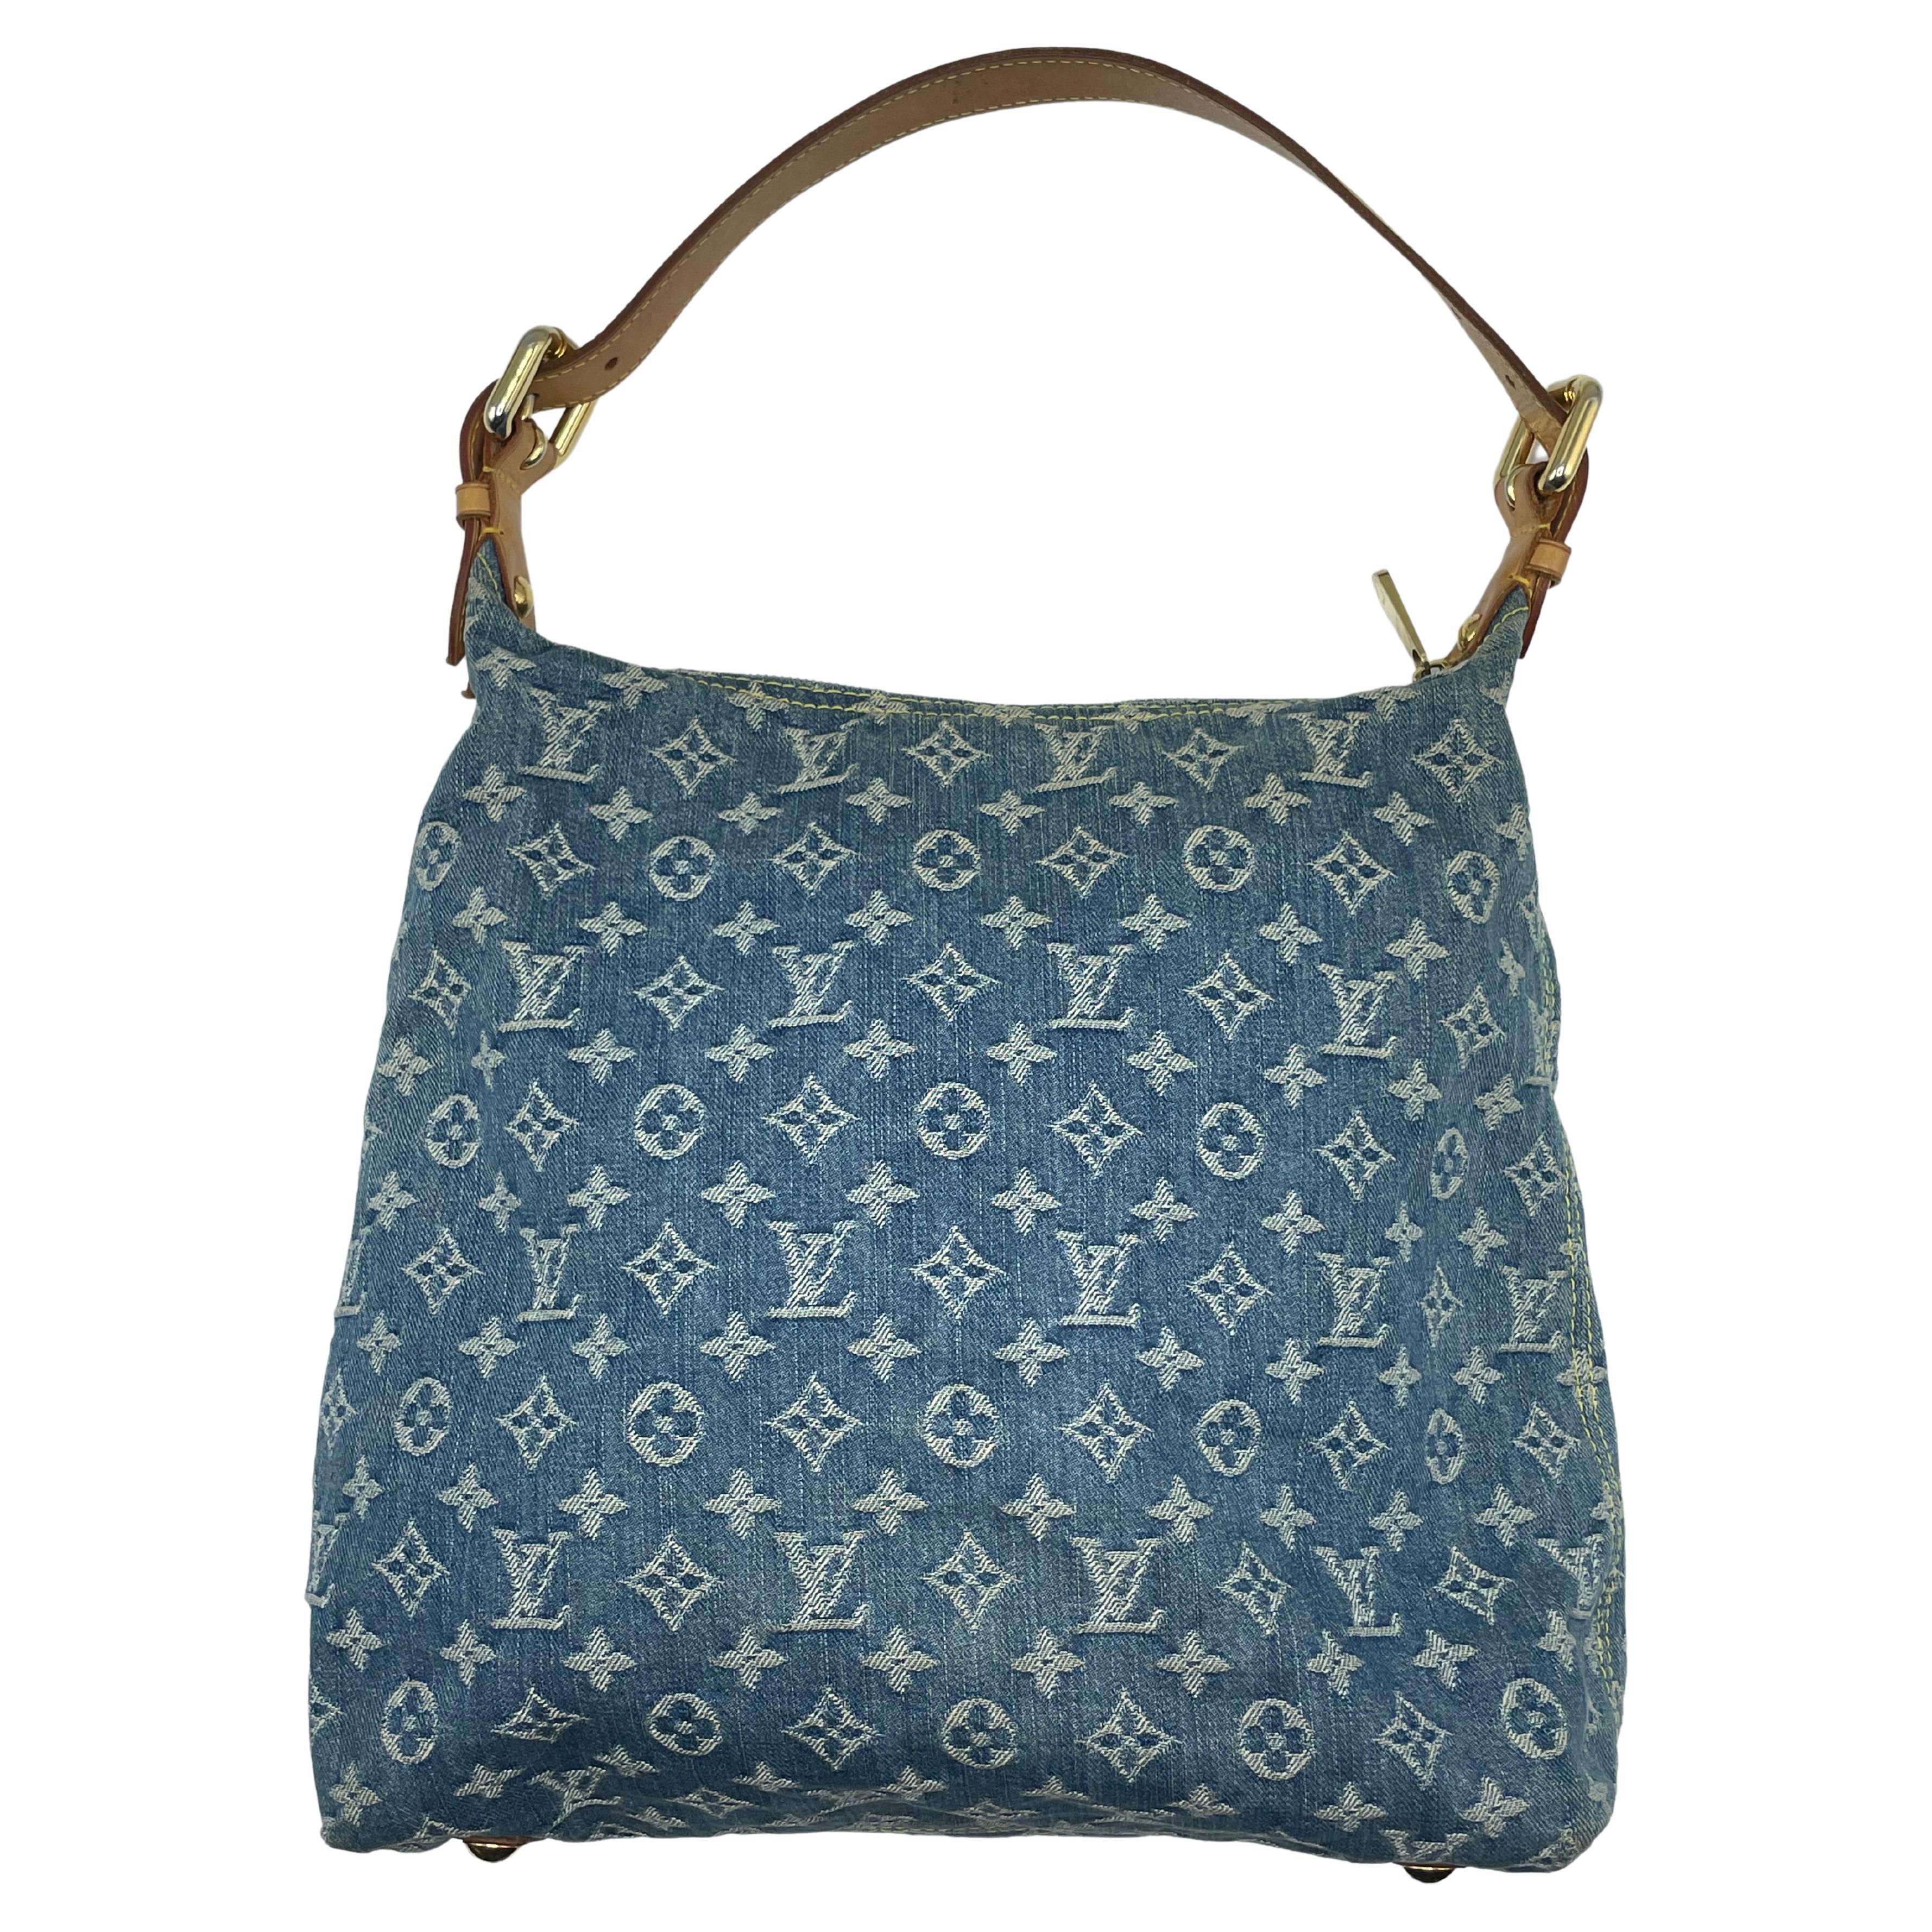 This blue LOUIS VUITTON Denim Baggy GM is genuine. This fashionable hobo is constructed of blue Louis Vuitton monogram denim. The shoulder bag has two front pockets with polished gold push locks, a huge pocket with a zipper, and an adjustable